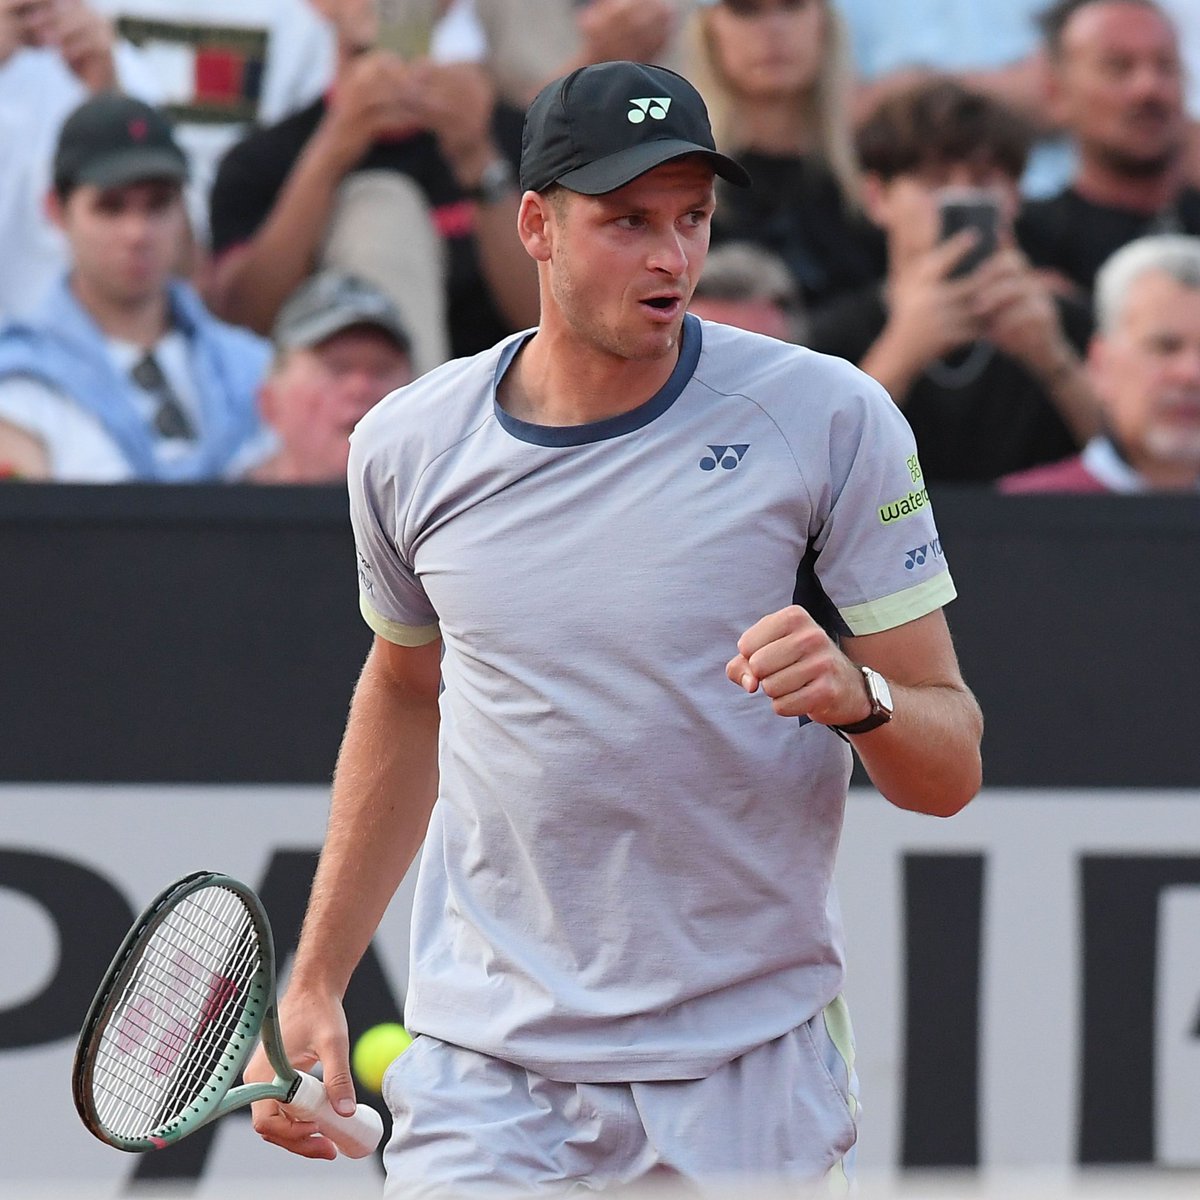 Well hello, #IBI24 quarterfinals 👋 Congratulations to our former champ @HubertHurkacz for reaching the final 🎱 in Rome after a 5-7, 7-6, 6-4 win over Baez 🙌. Congrats to our reigning champ, Sebastian Baez, on a great run.